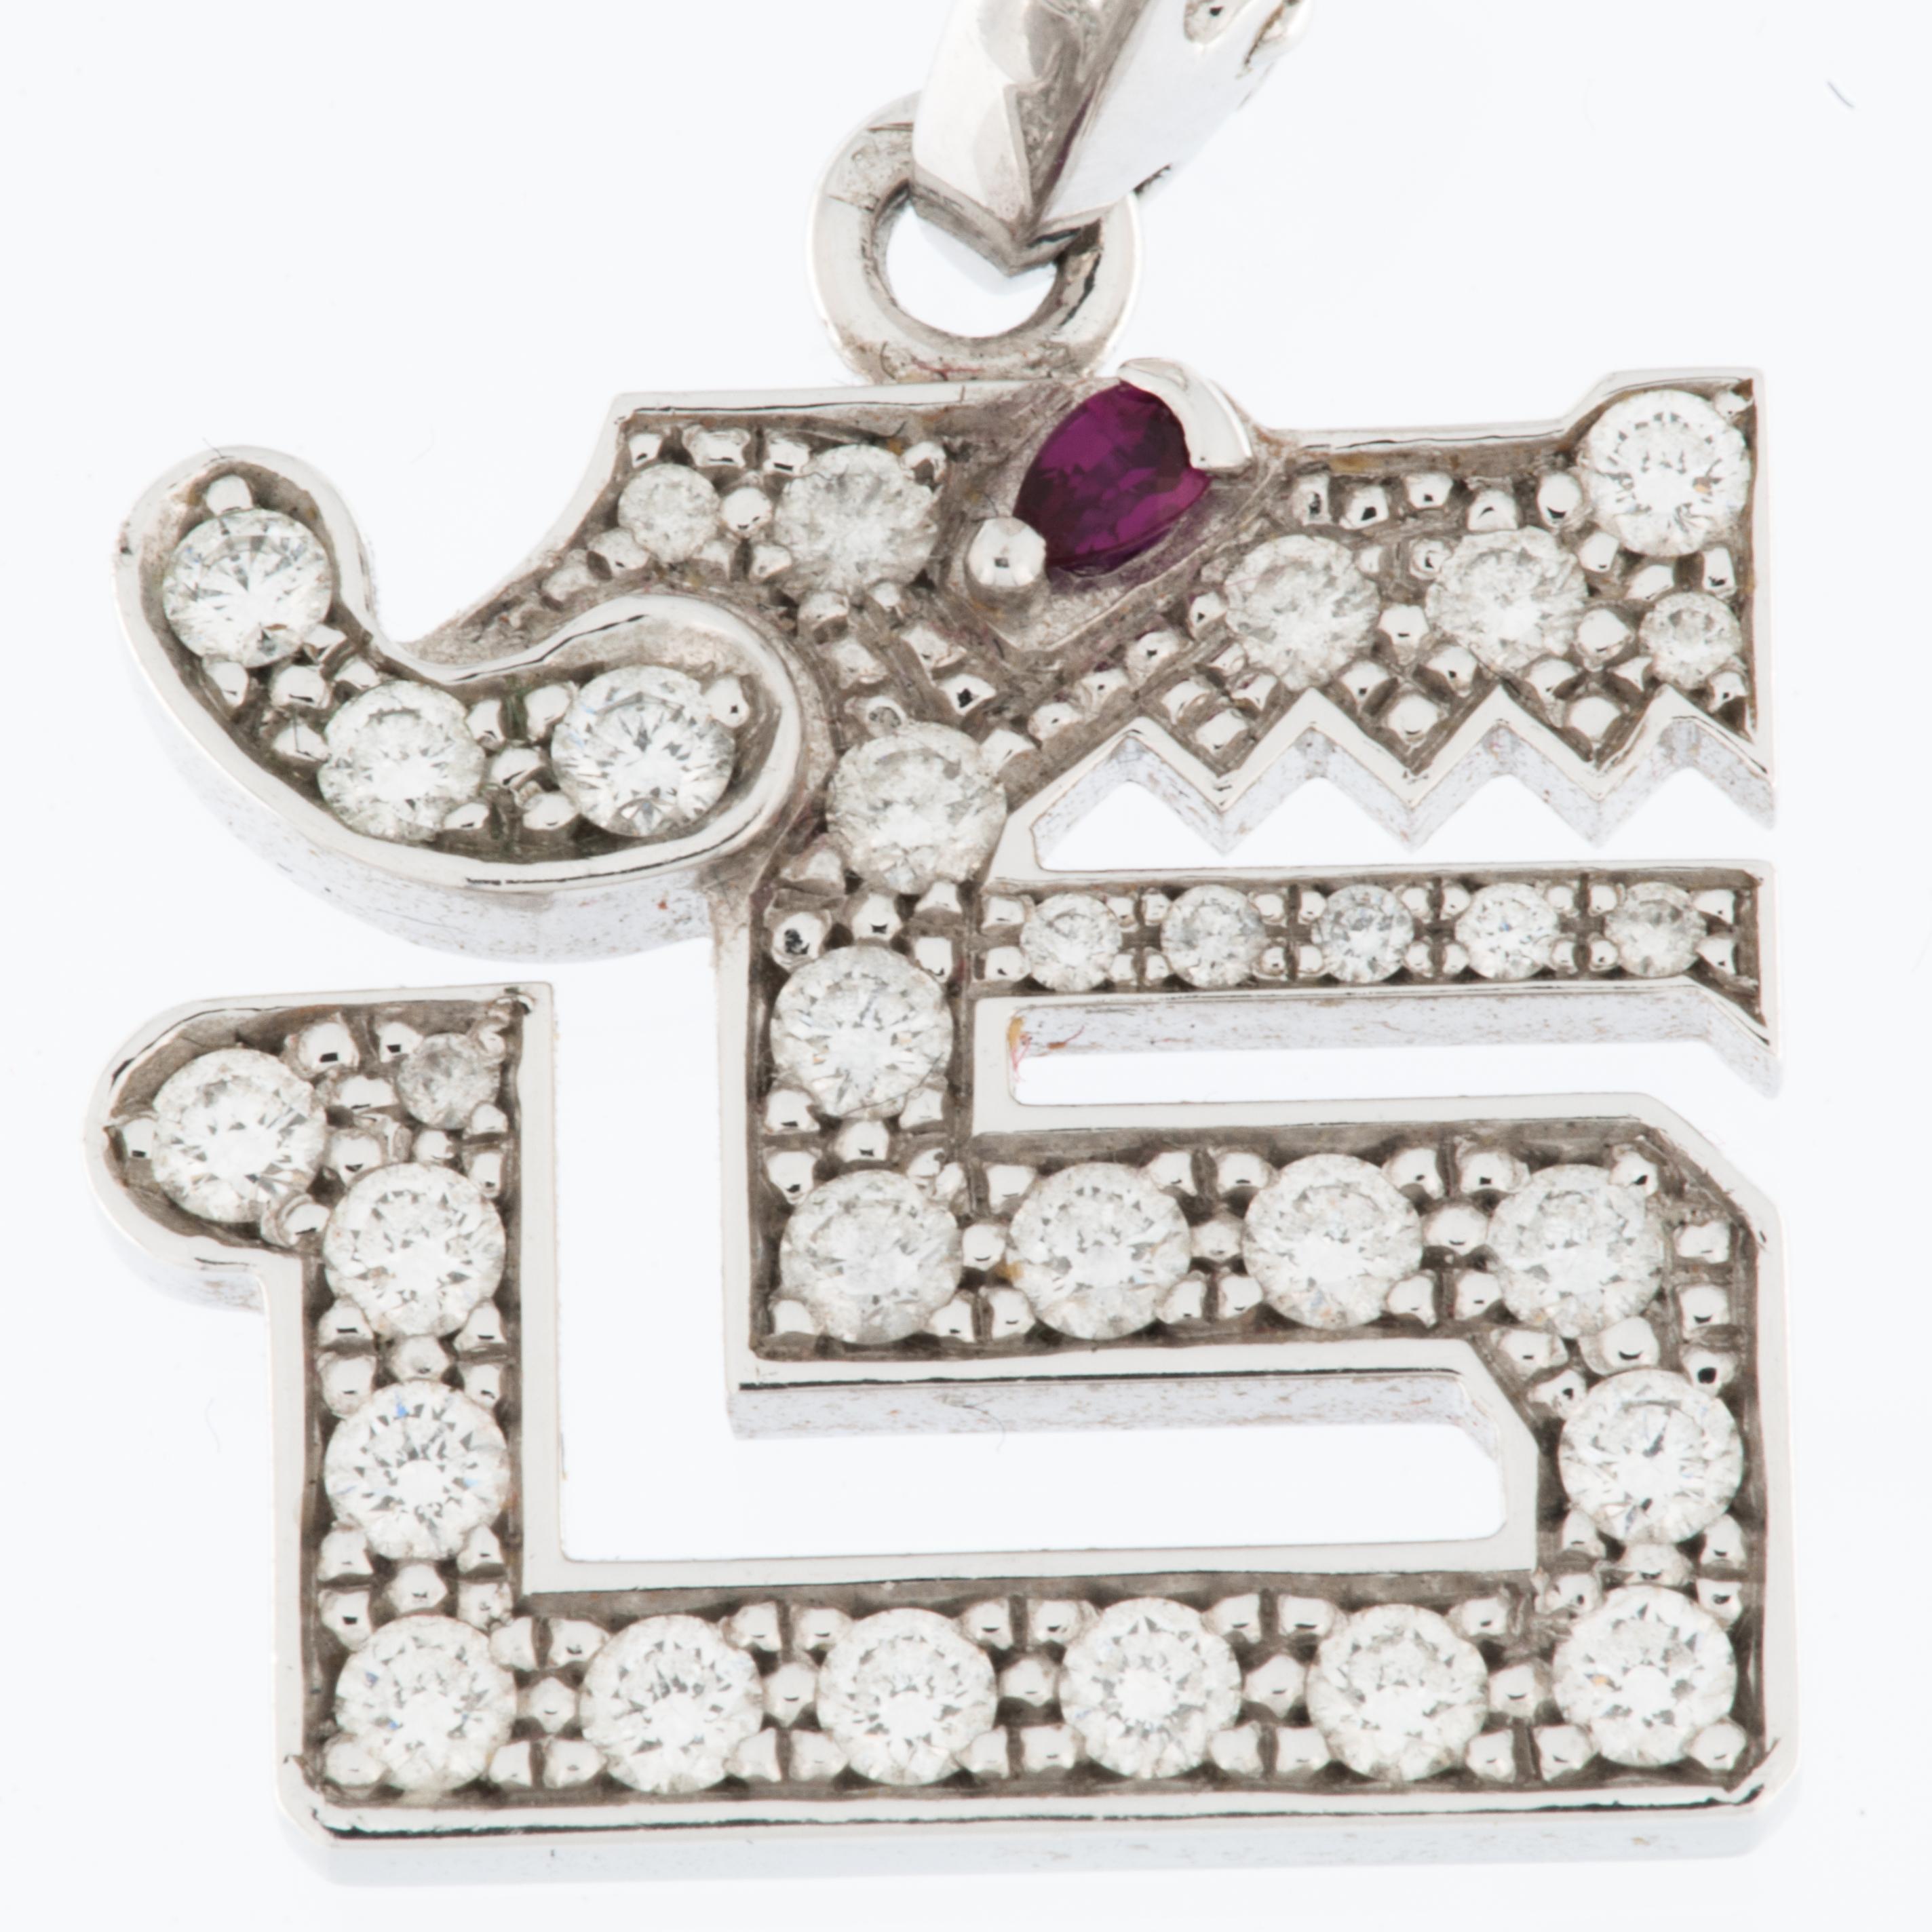 The Cartier Le Baiser du Dragon Charm Pendant in 18-karat White Gold with Diamonds and Ruby is a luxurious and iconic piece of jewelry that embodies the sophistication and craftsmanship for which Cartier is renowned.

The pendant features the Le